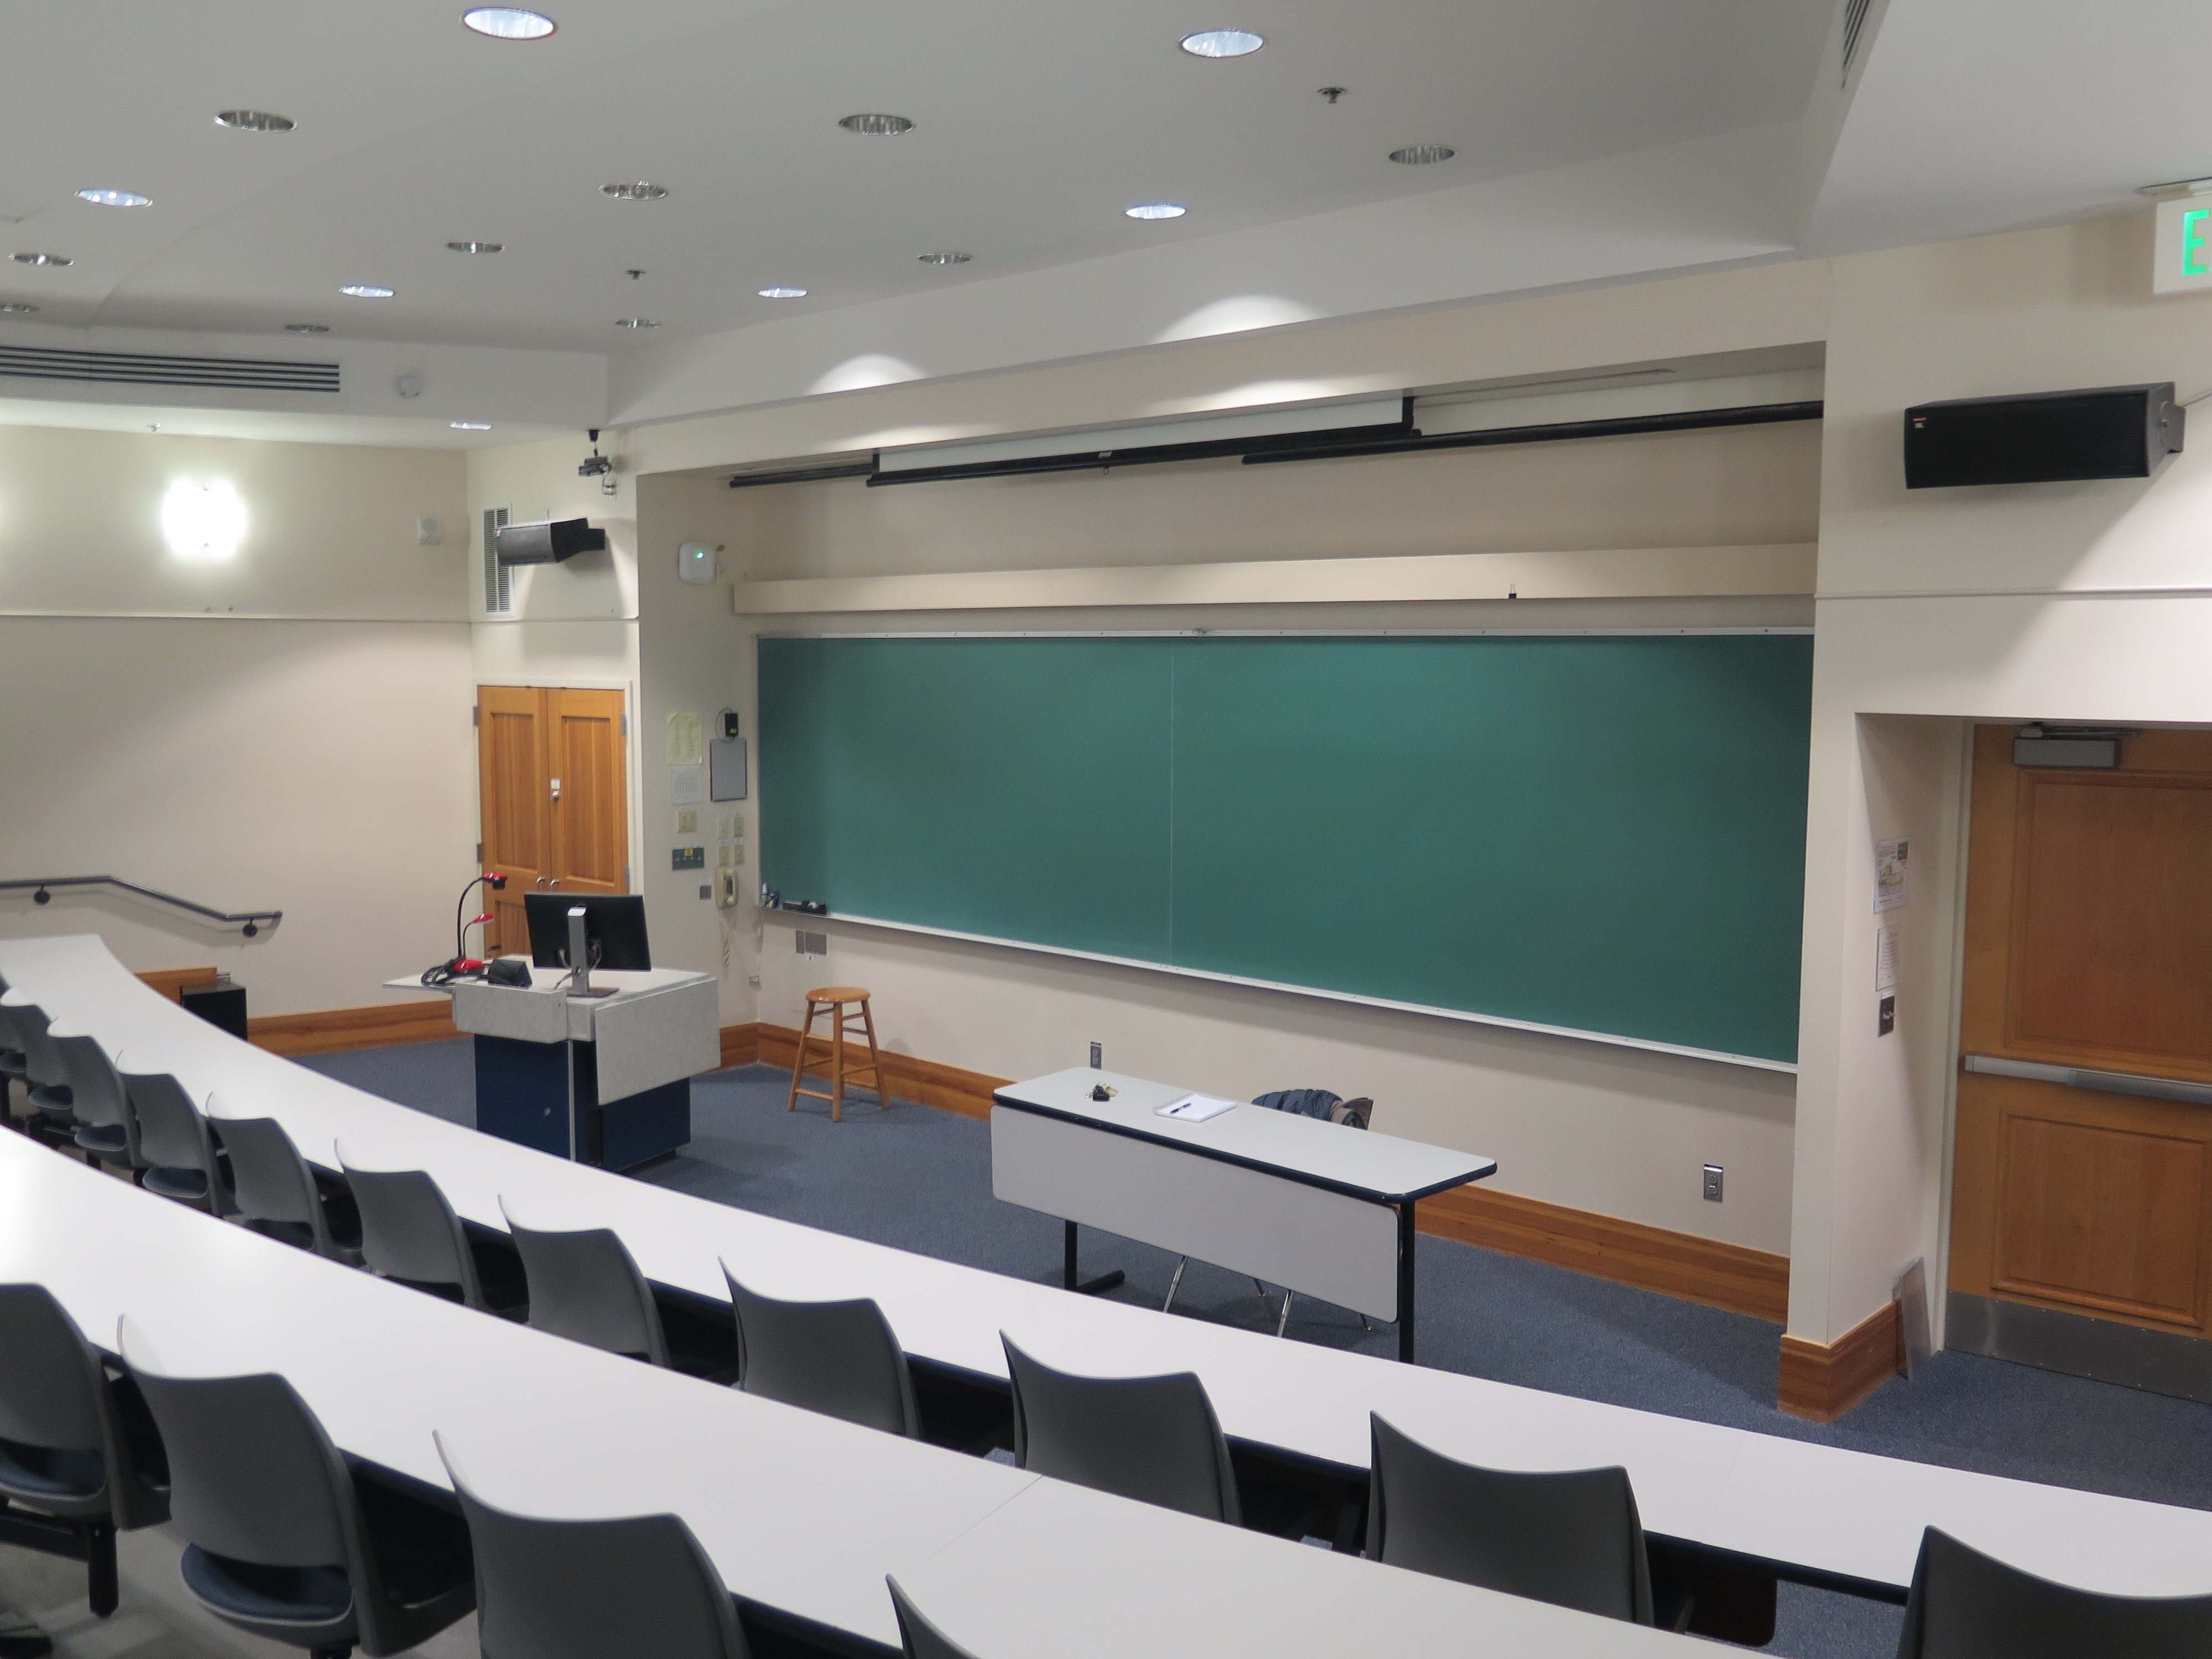 Room Consists of auditorium style, stationary tables and chairs, White board and podium are located at the front of the room.